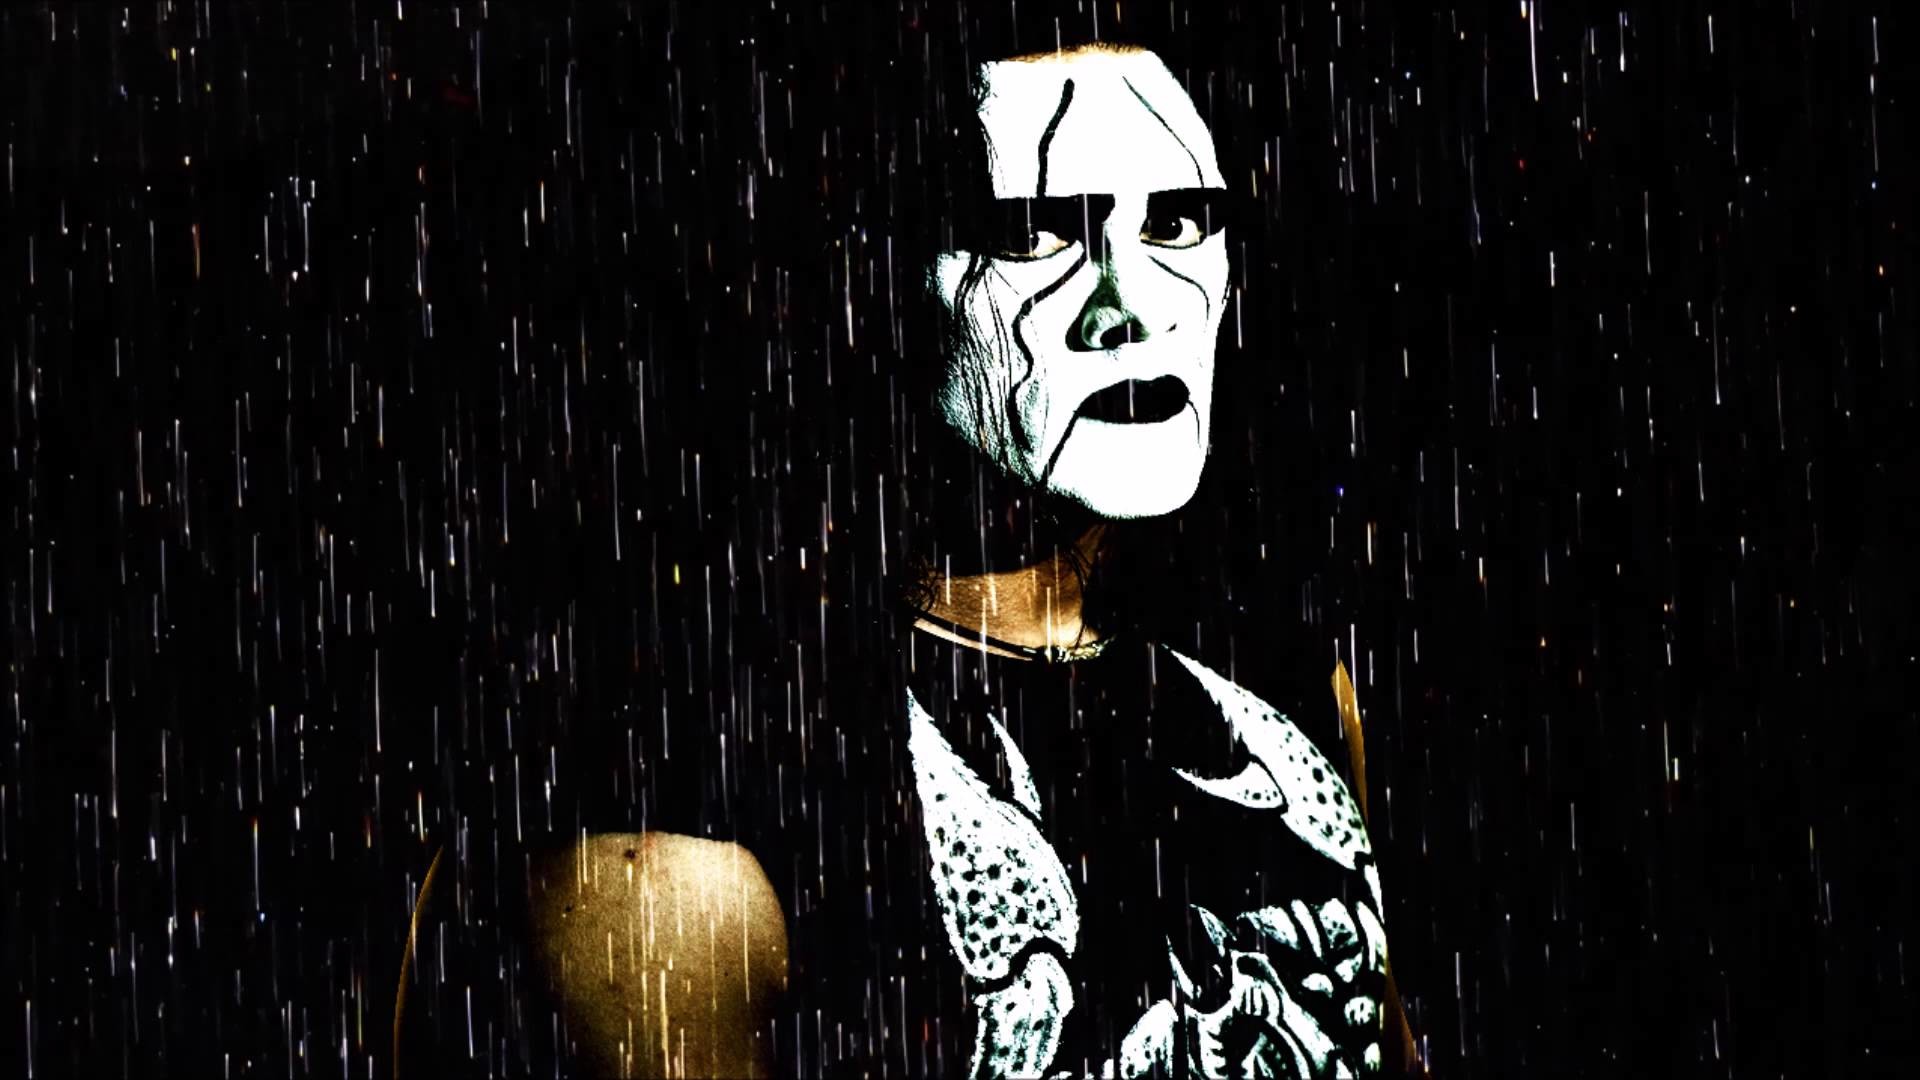 1920x1080 Sting WCW theme song